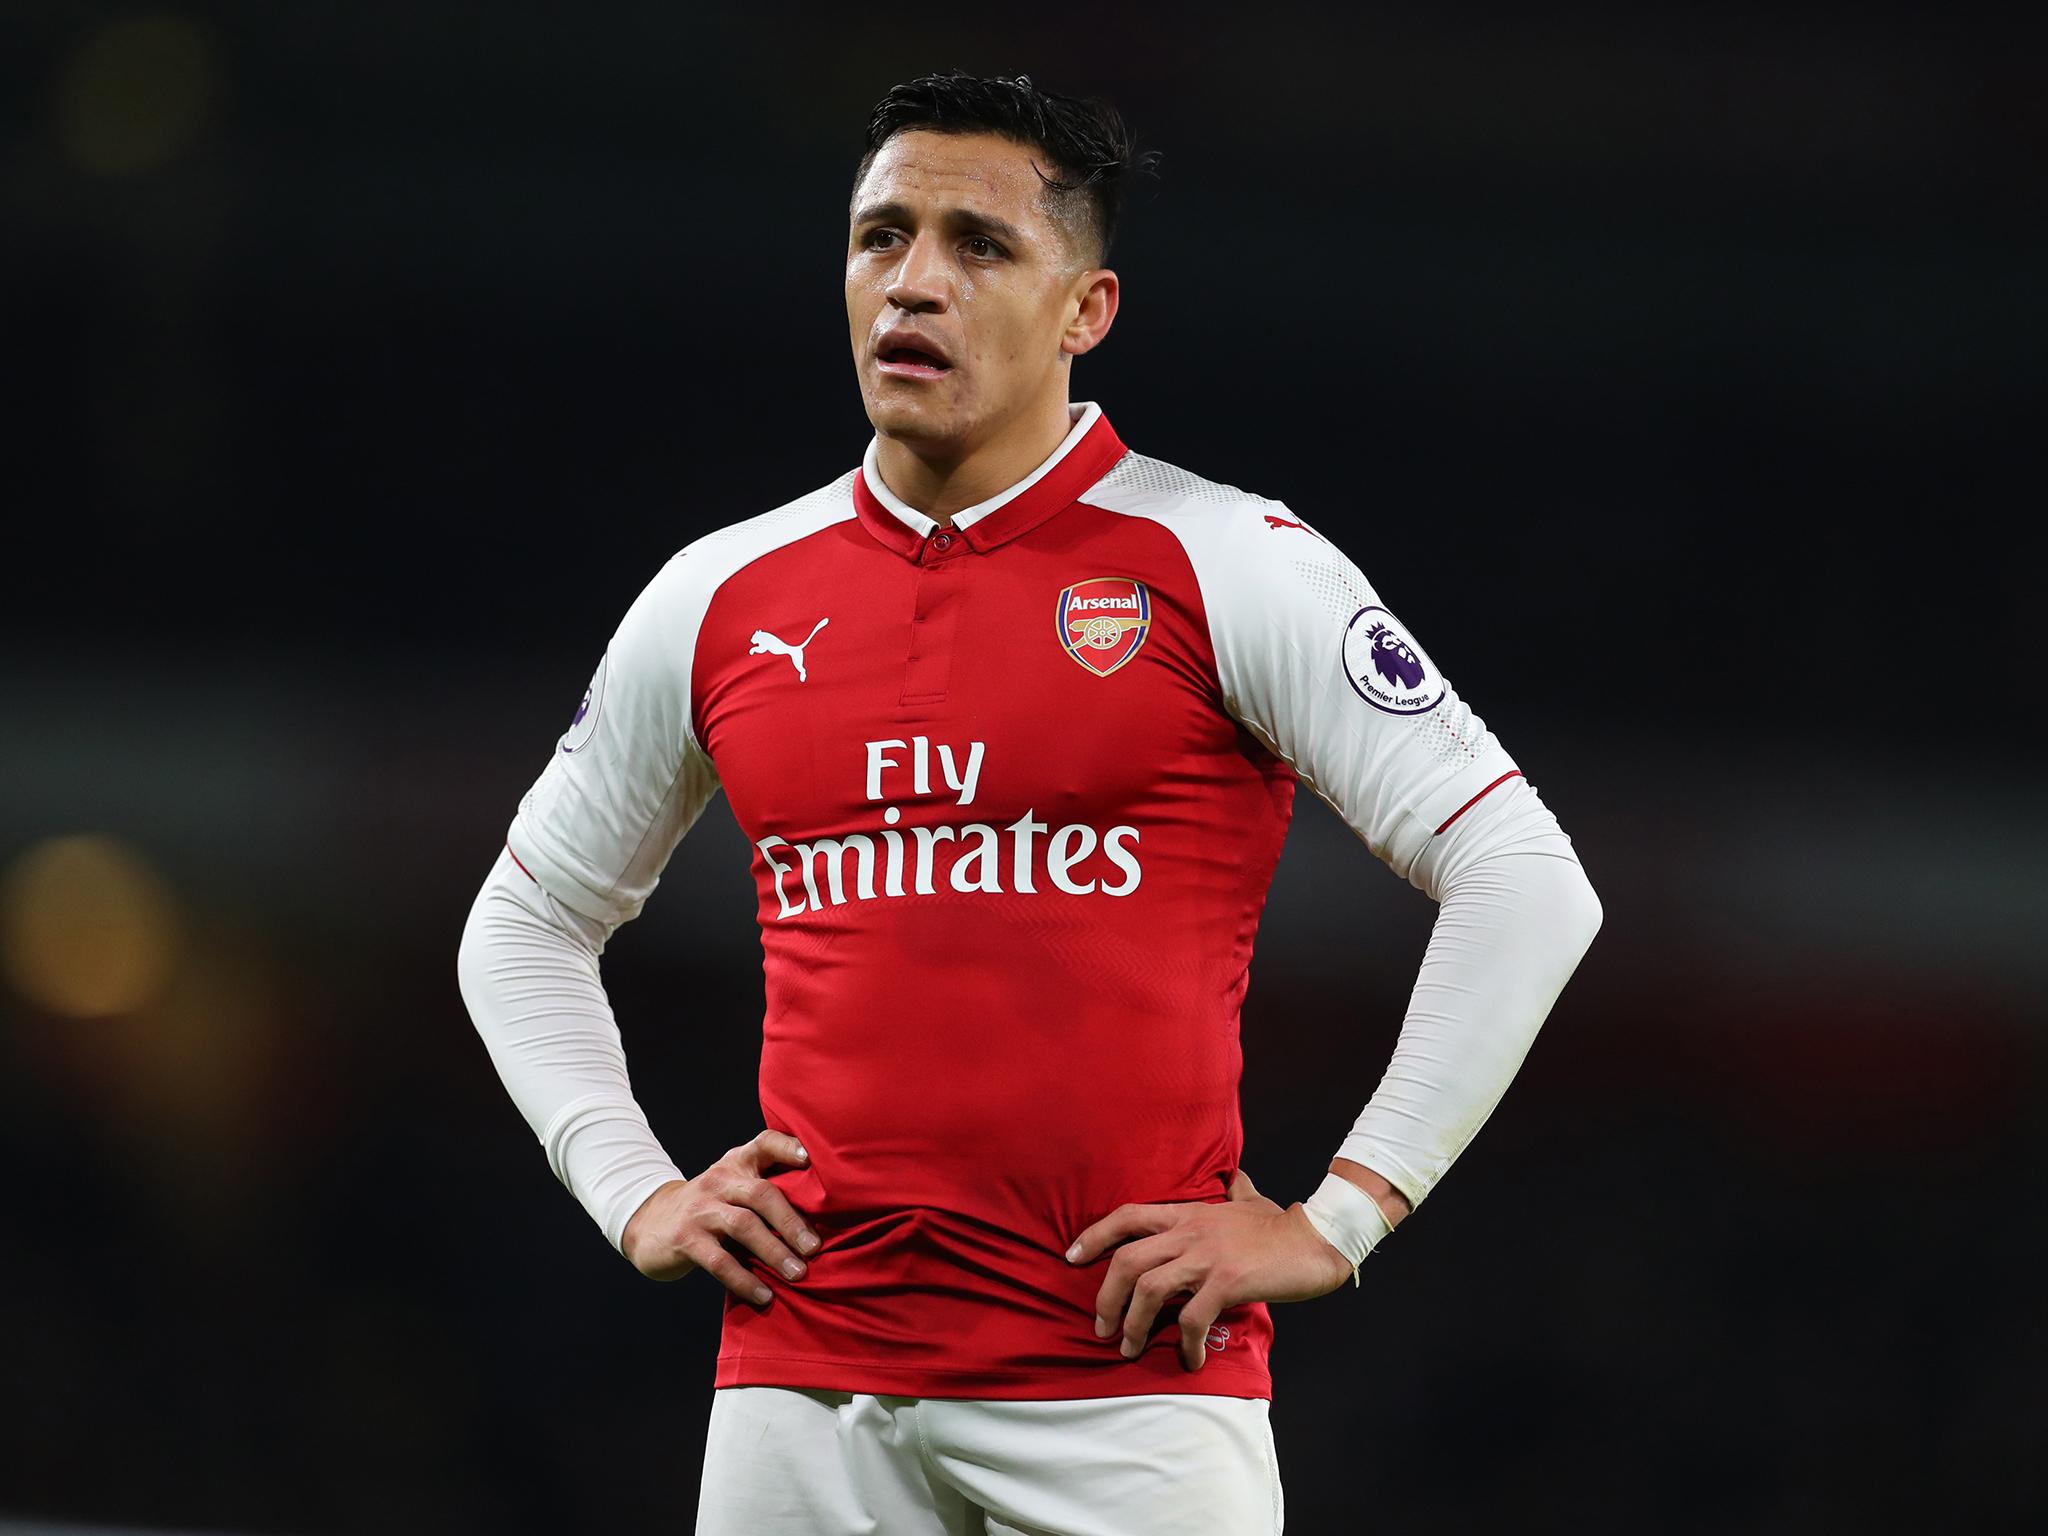 Alexis Sanchez's time at Arsenal looks to be drawing to a close